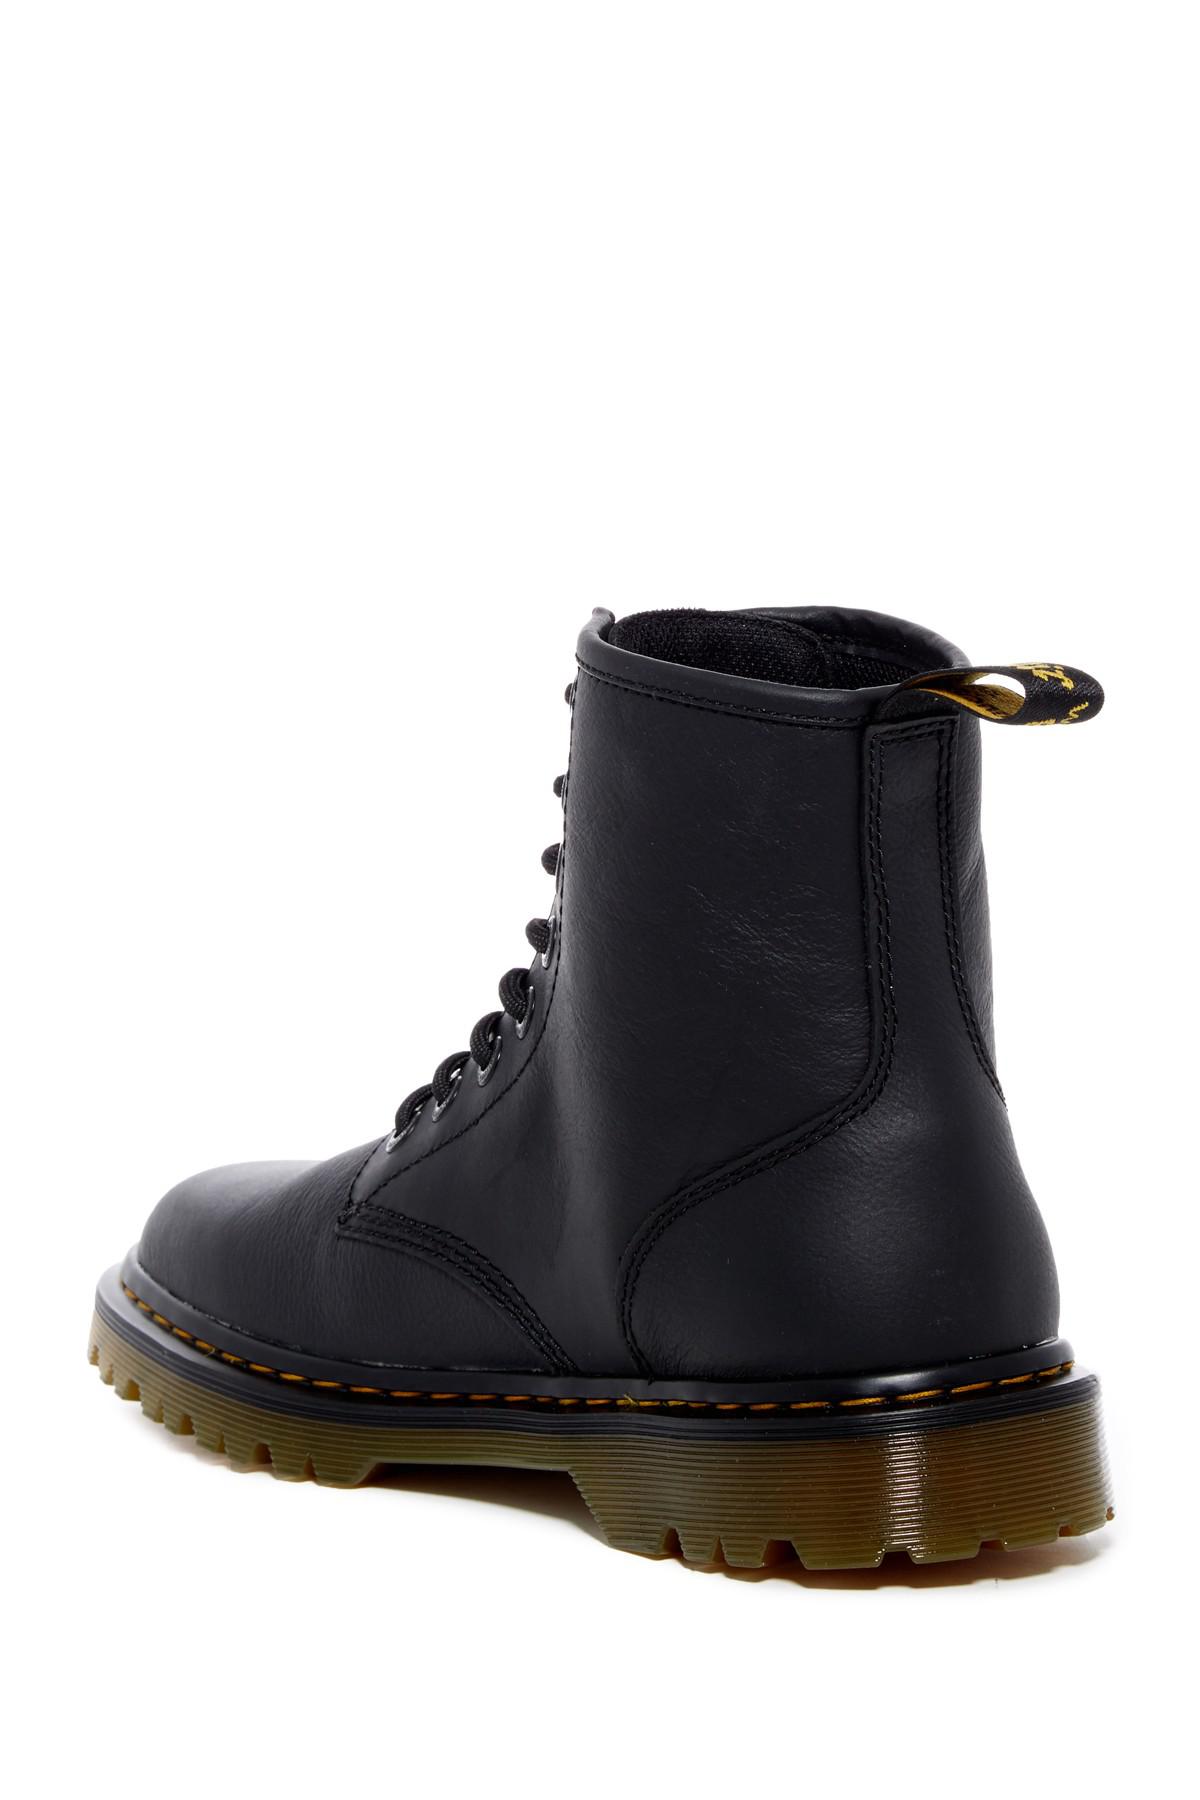 dr martens awley boots